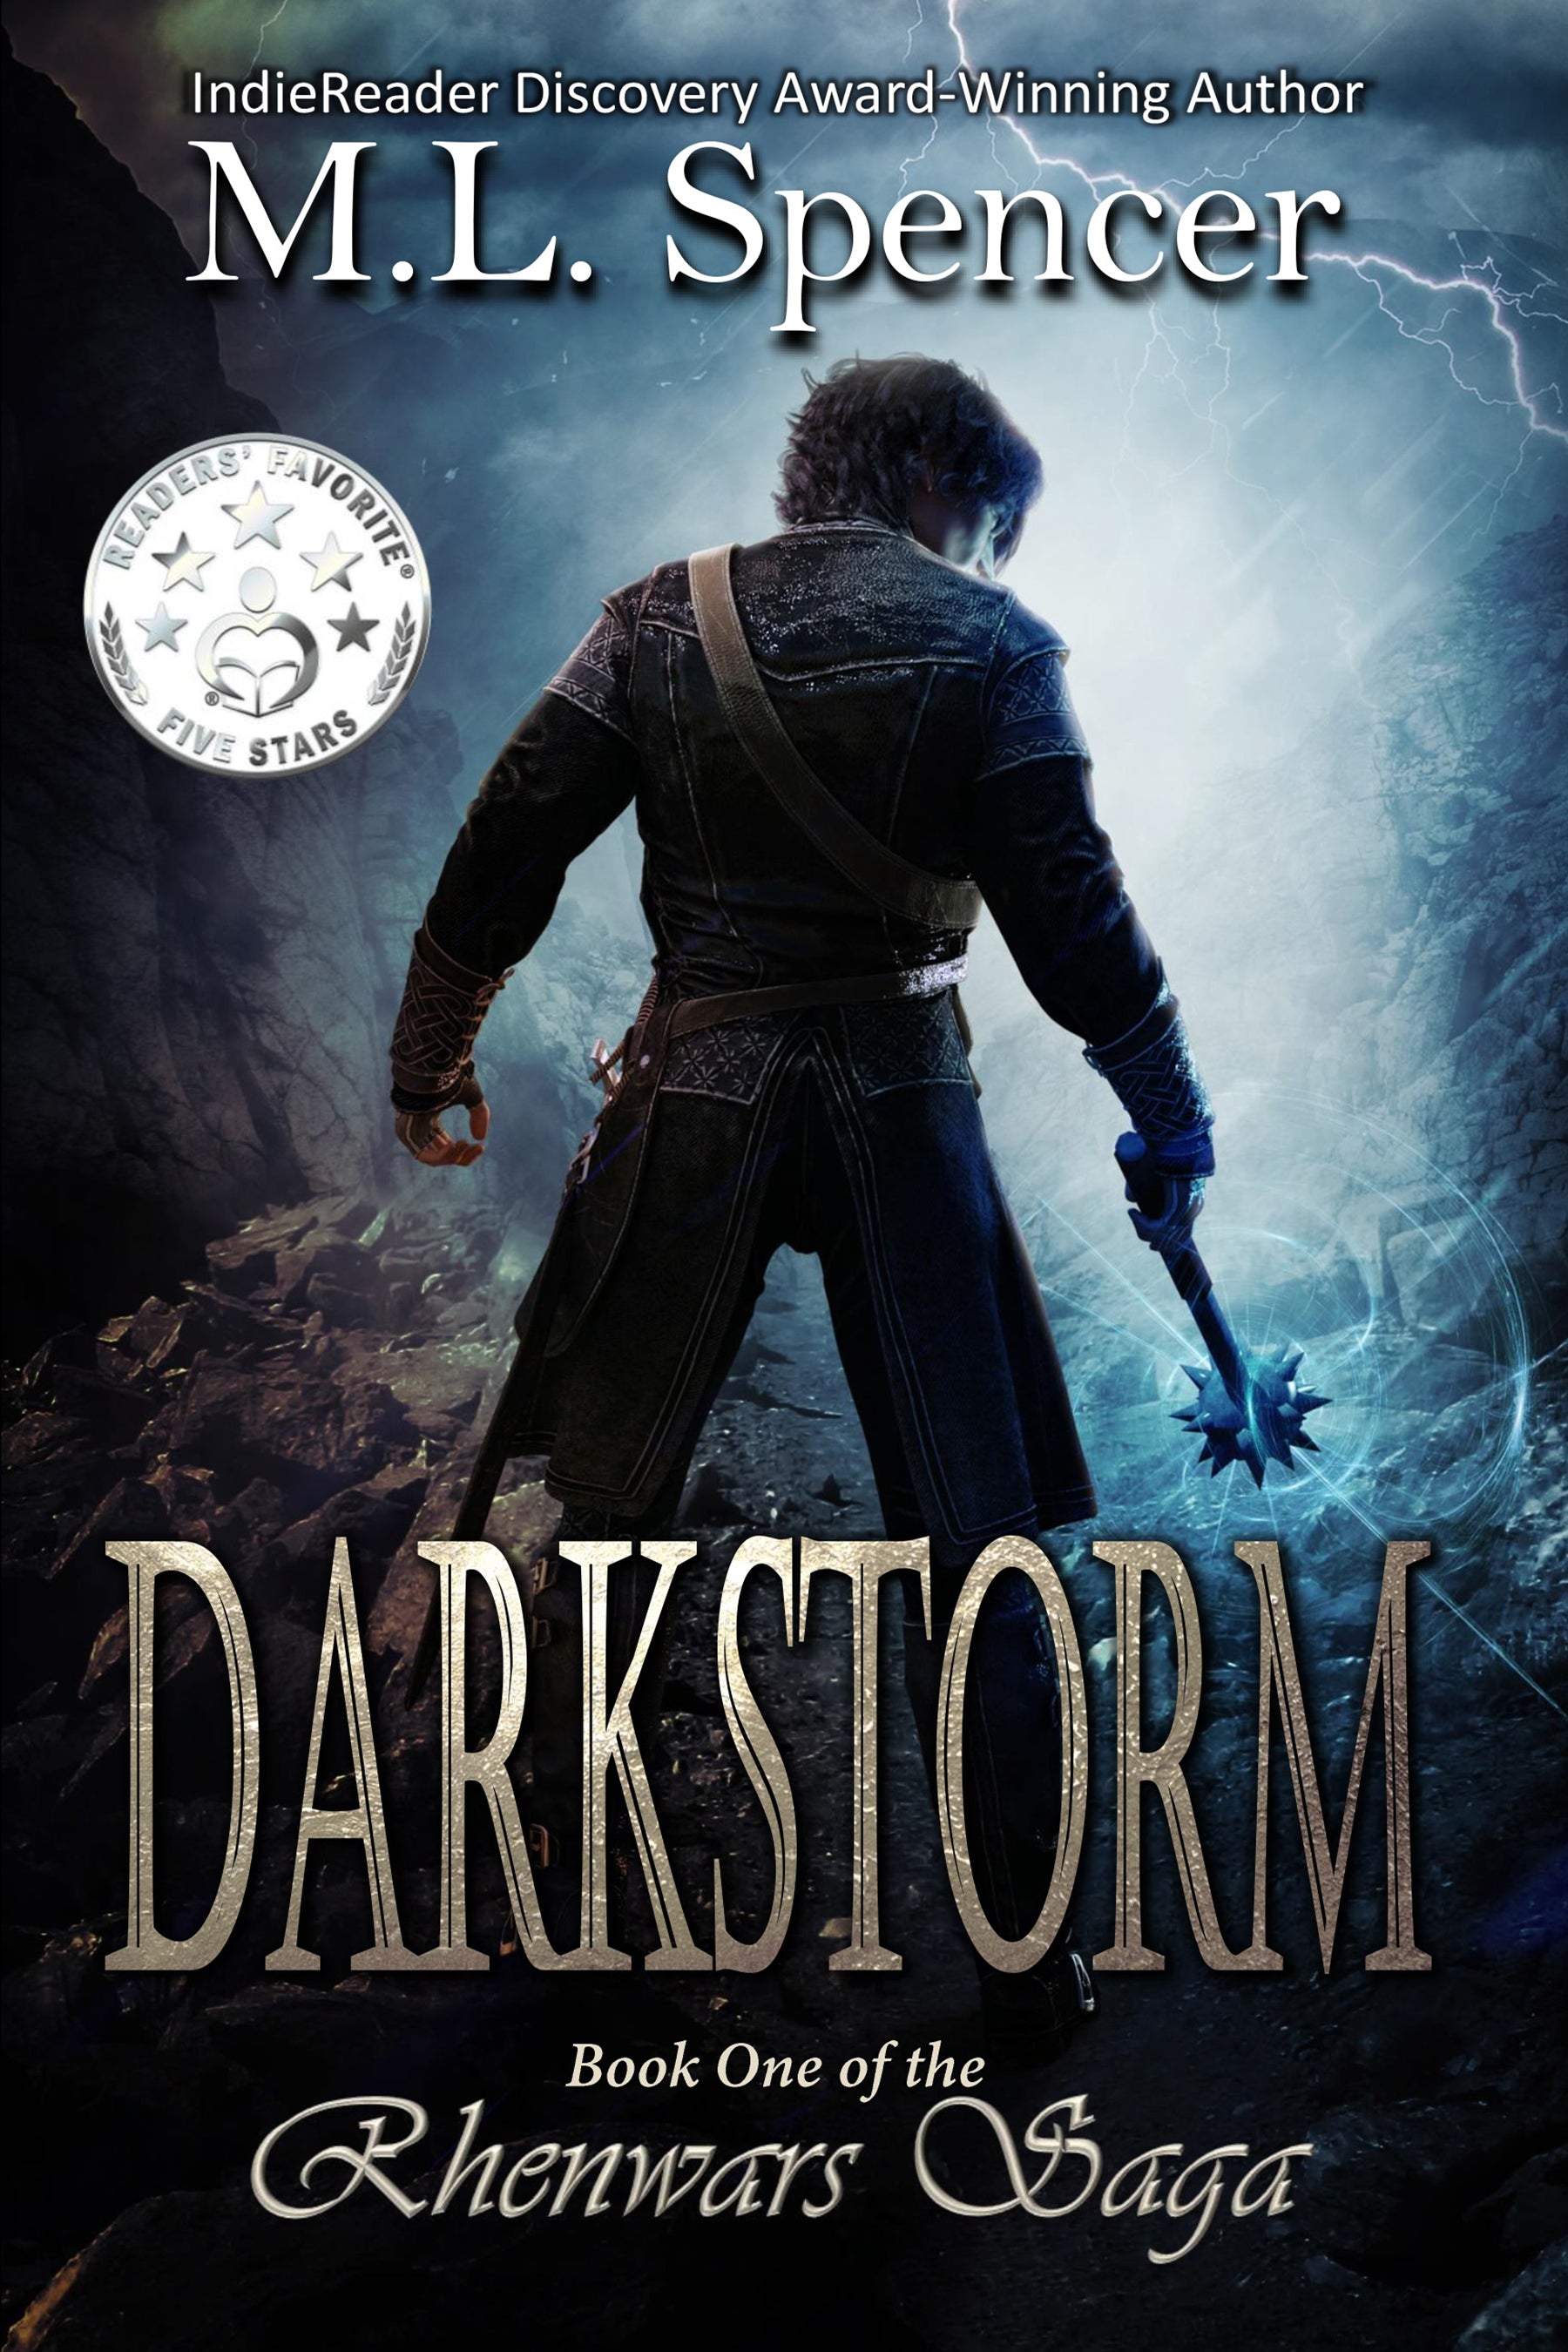 Book Review: Darkstorm by ML Spencer